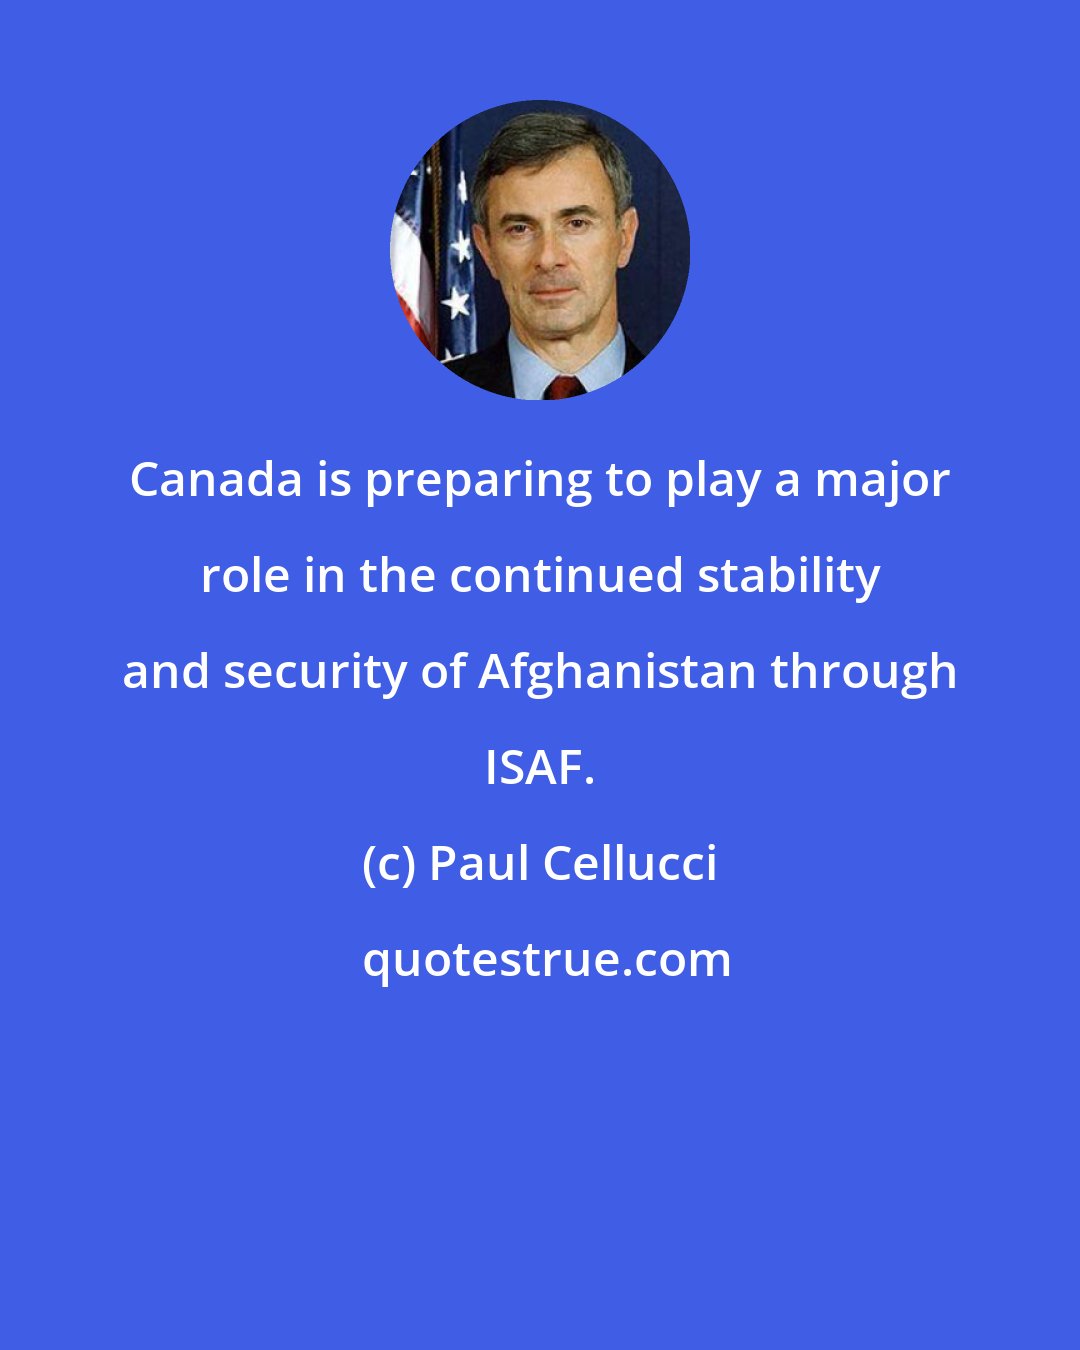 Paul Cellucci: Canada is preparing to play a major role in the continued stability and security of Afghanistan through ISAF.